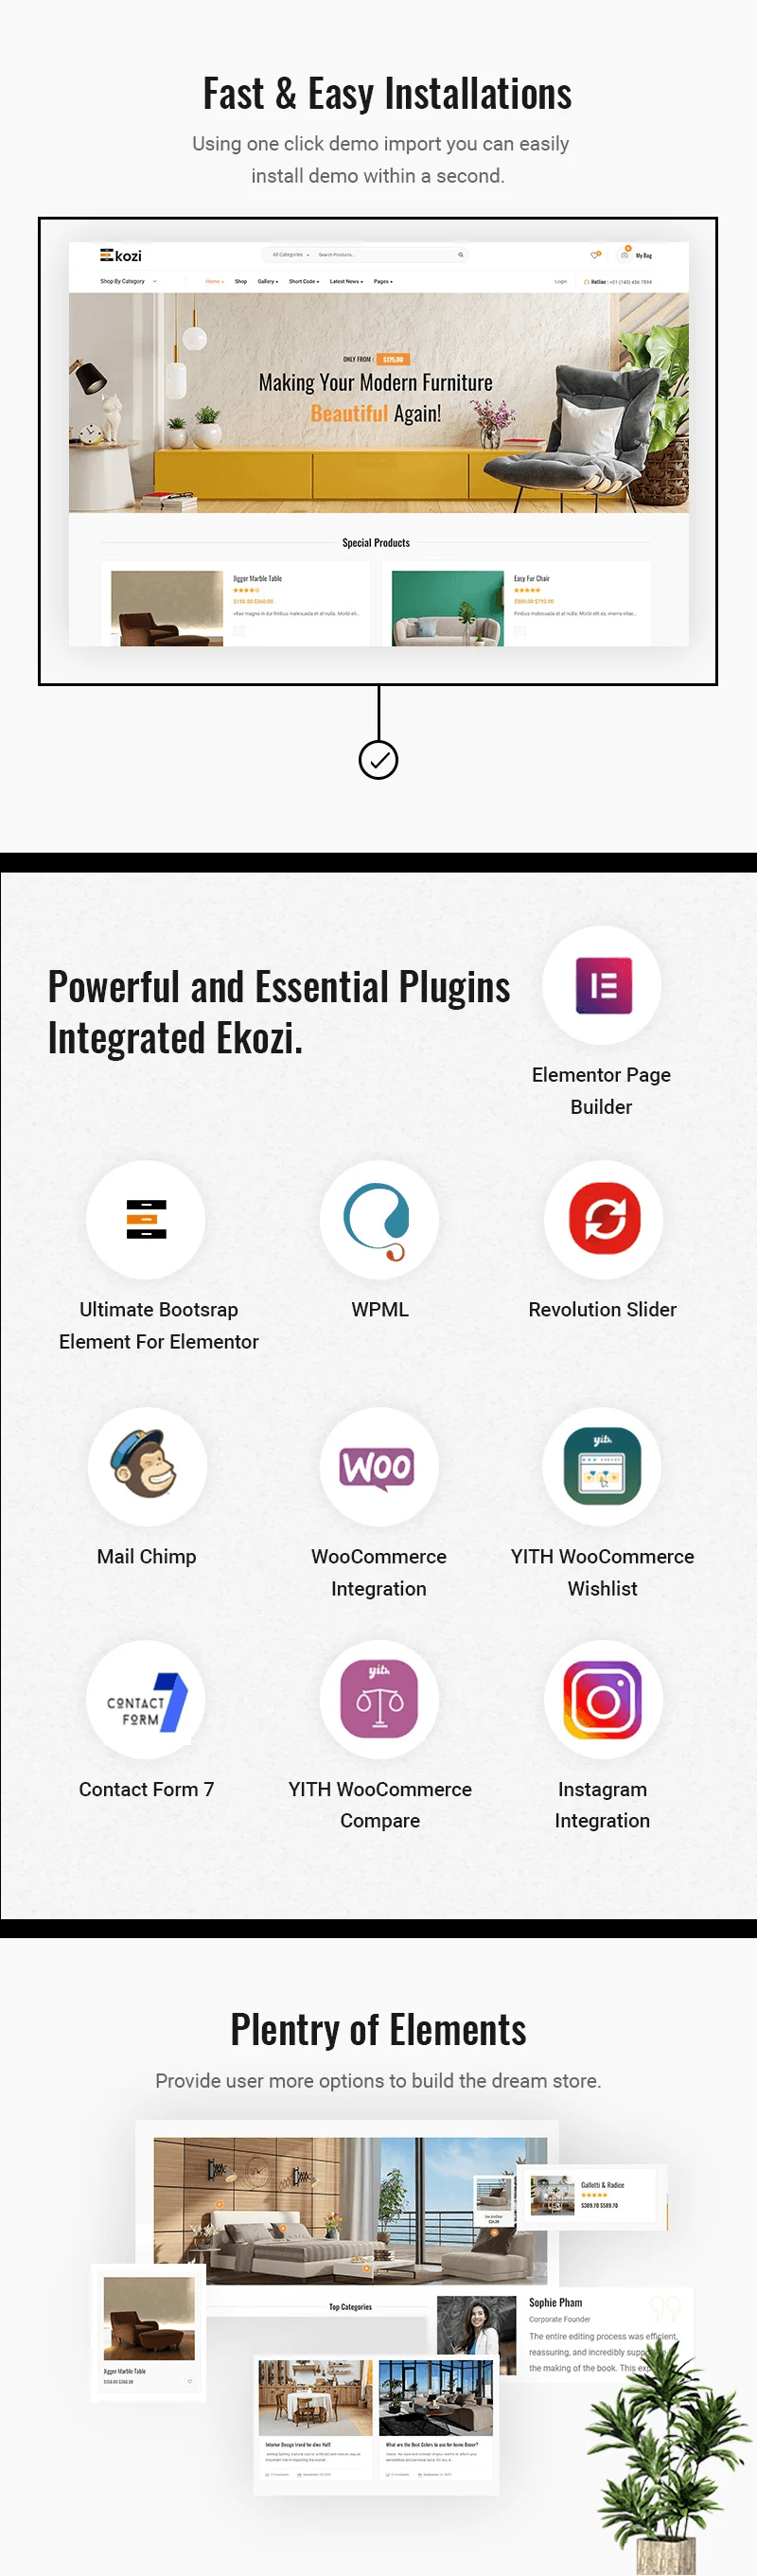 Various plugins and more.